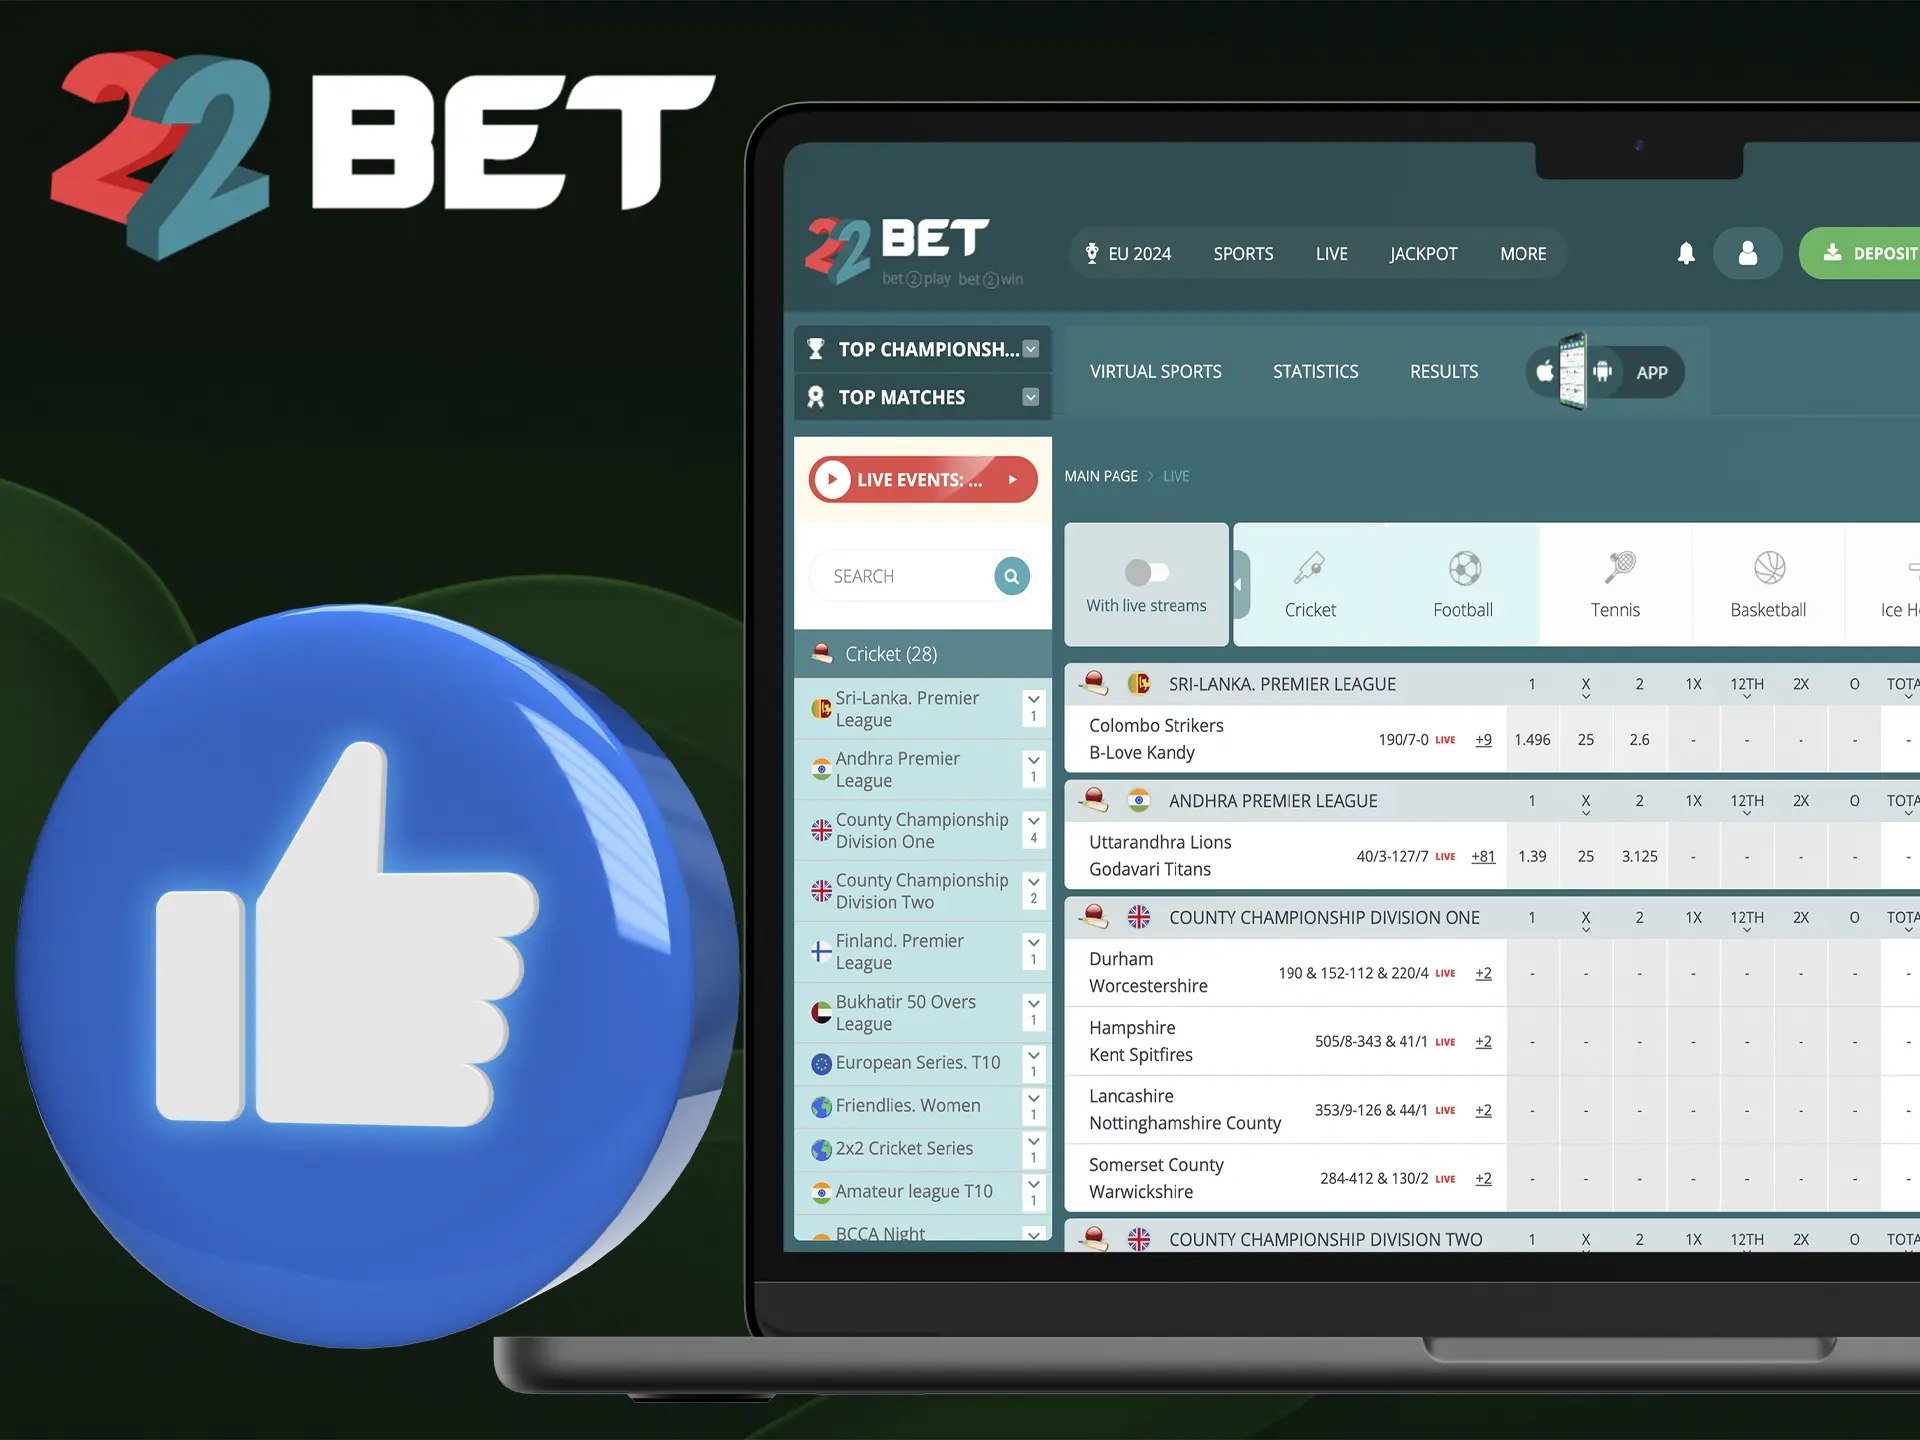 Explore the main features that make 22Bet stand out as one of the best bookmakers.